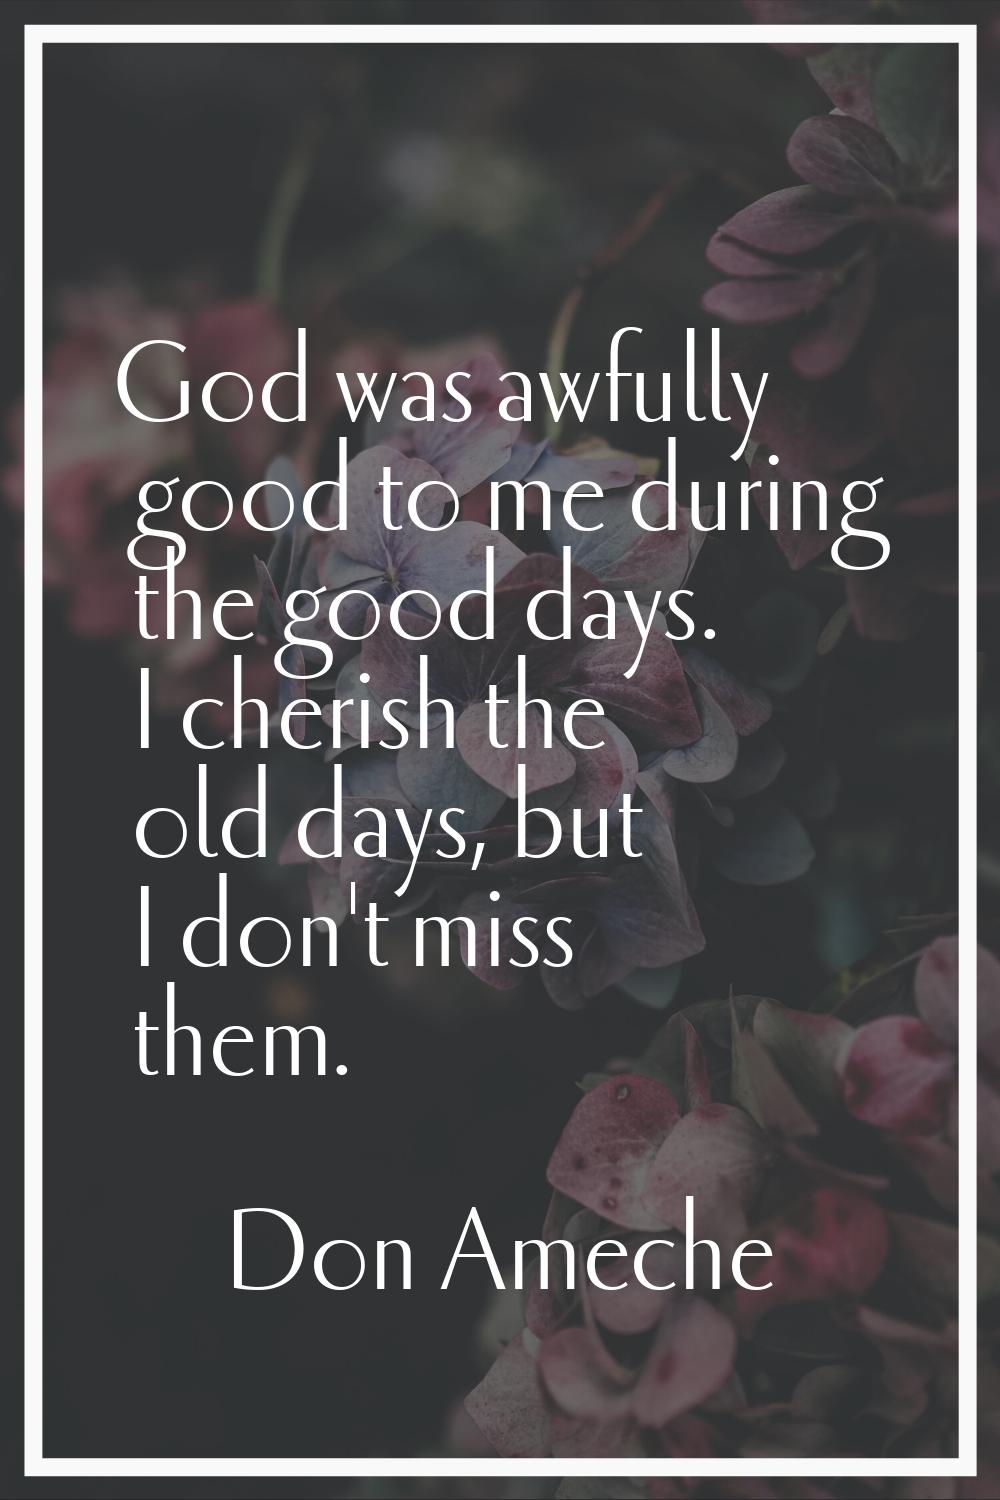 God was awfully good to me during the good days. I cherish the old days, but I don't miss them.